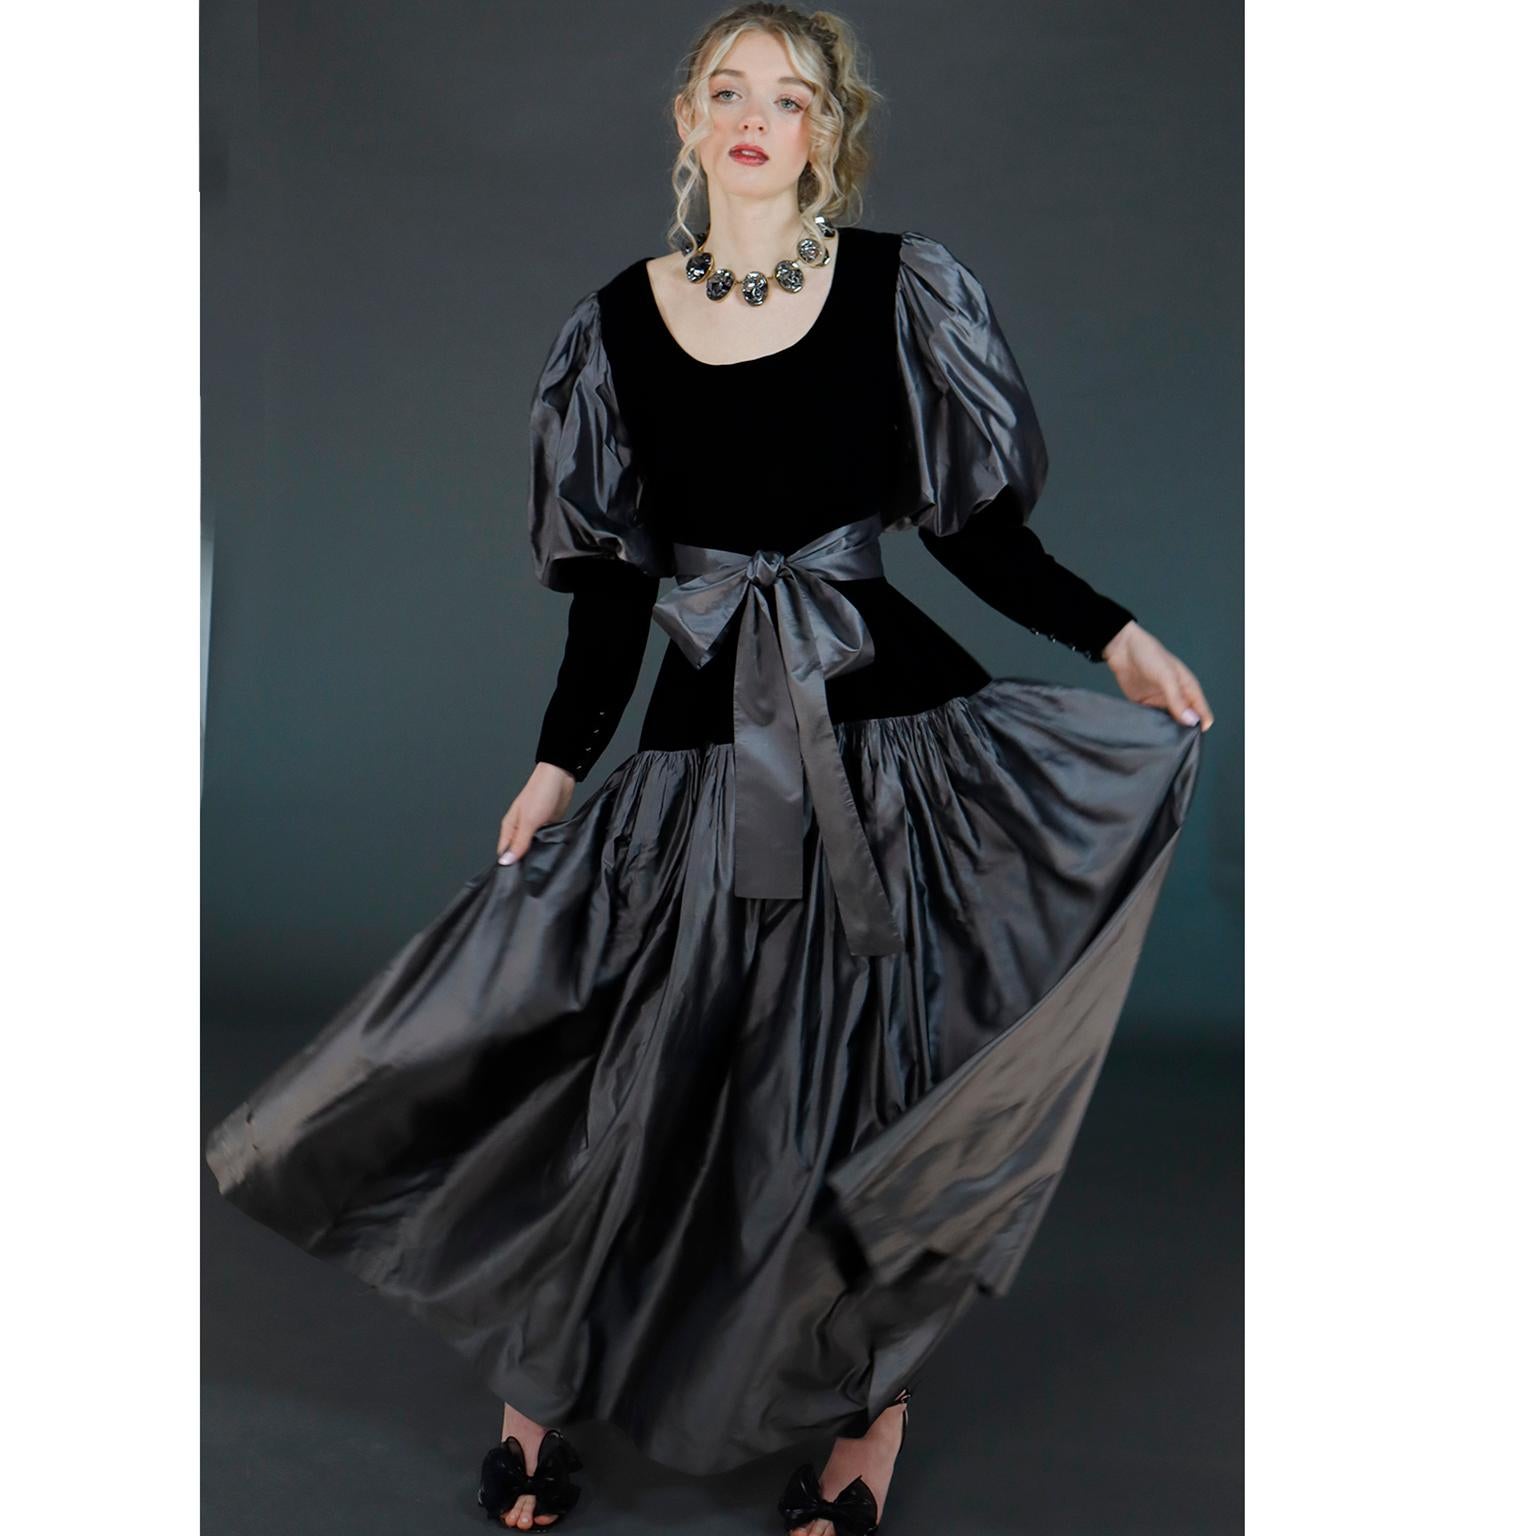 Yves Saint Laurent YSL 1982 Silver Taffeta and Black Velvet Runway Evening Dress In Good Condition For Sale In Portland, OR